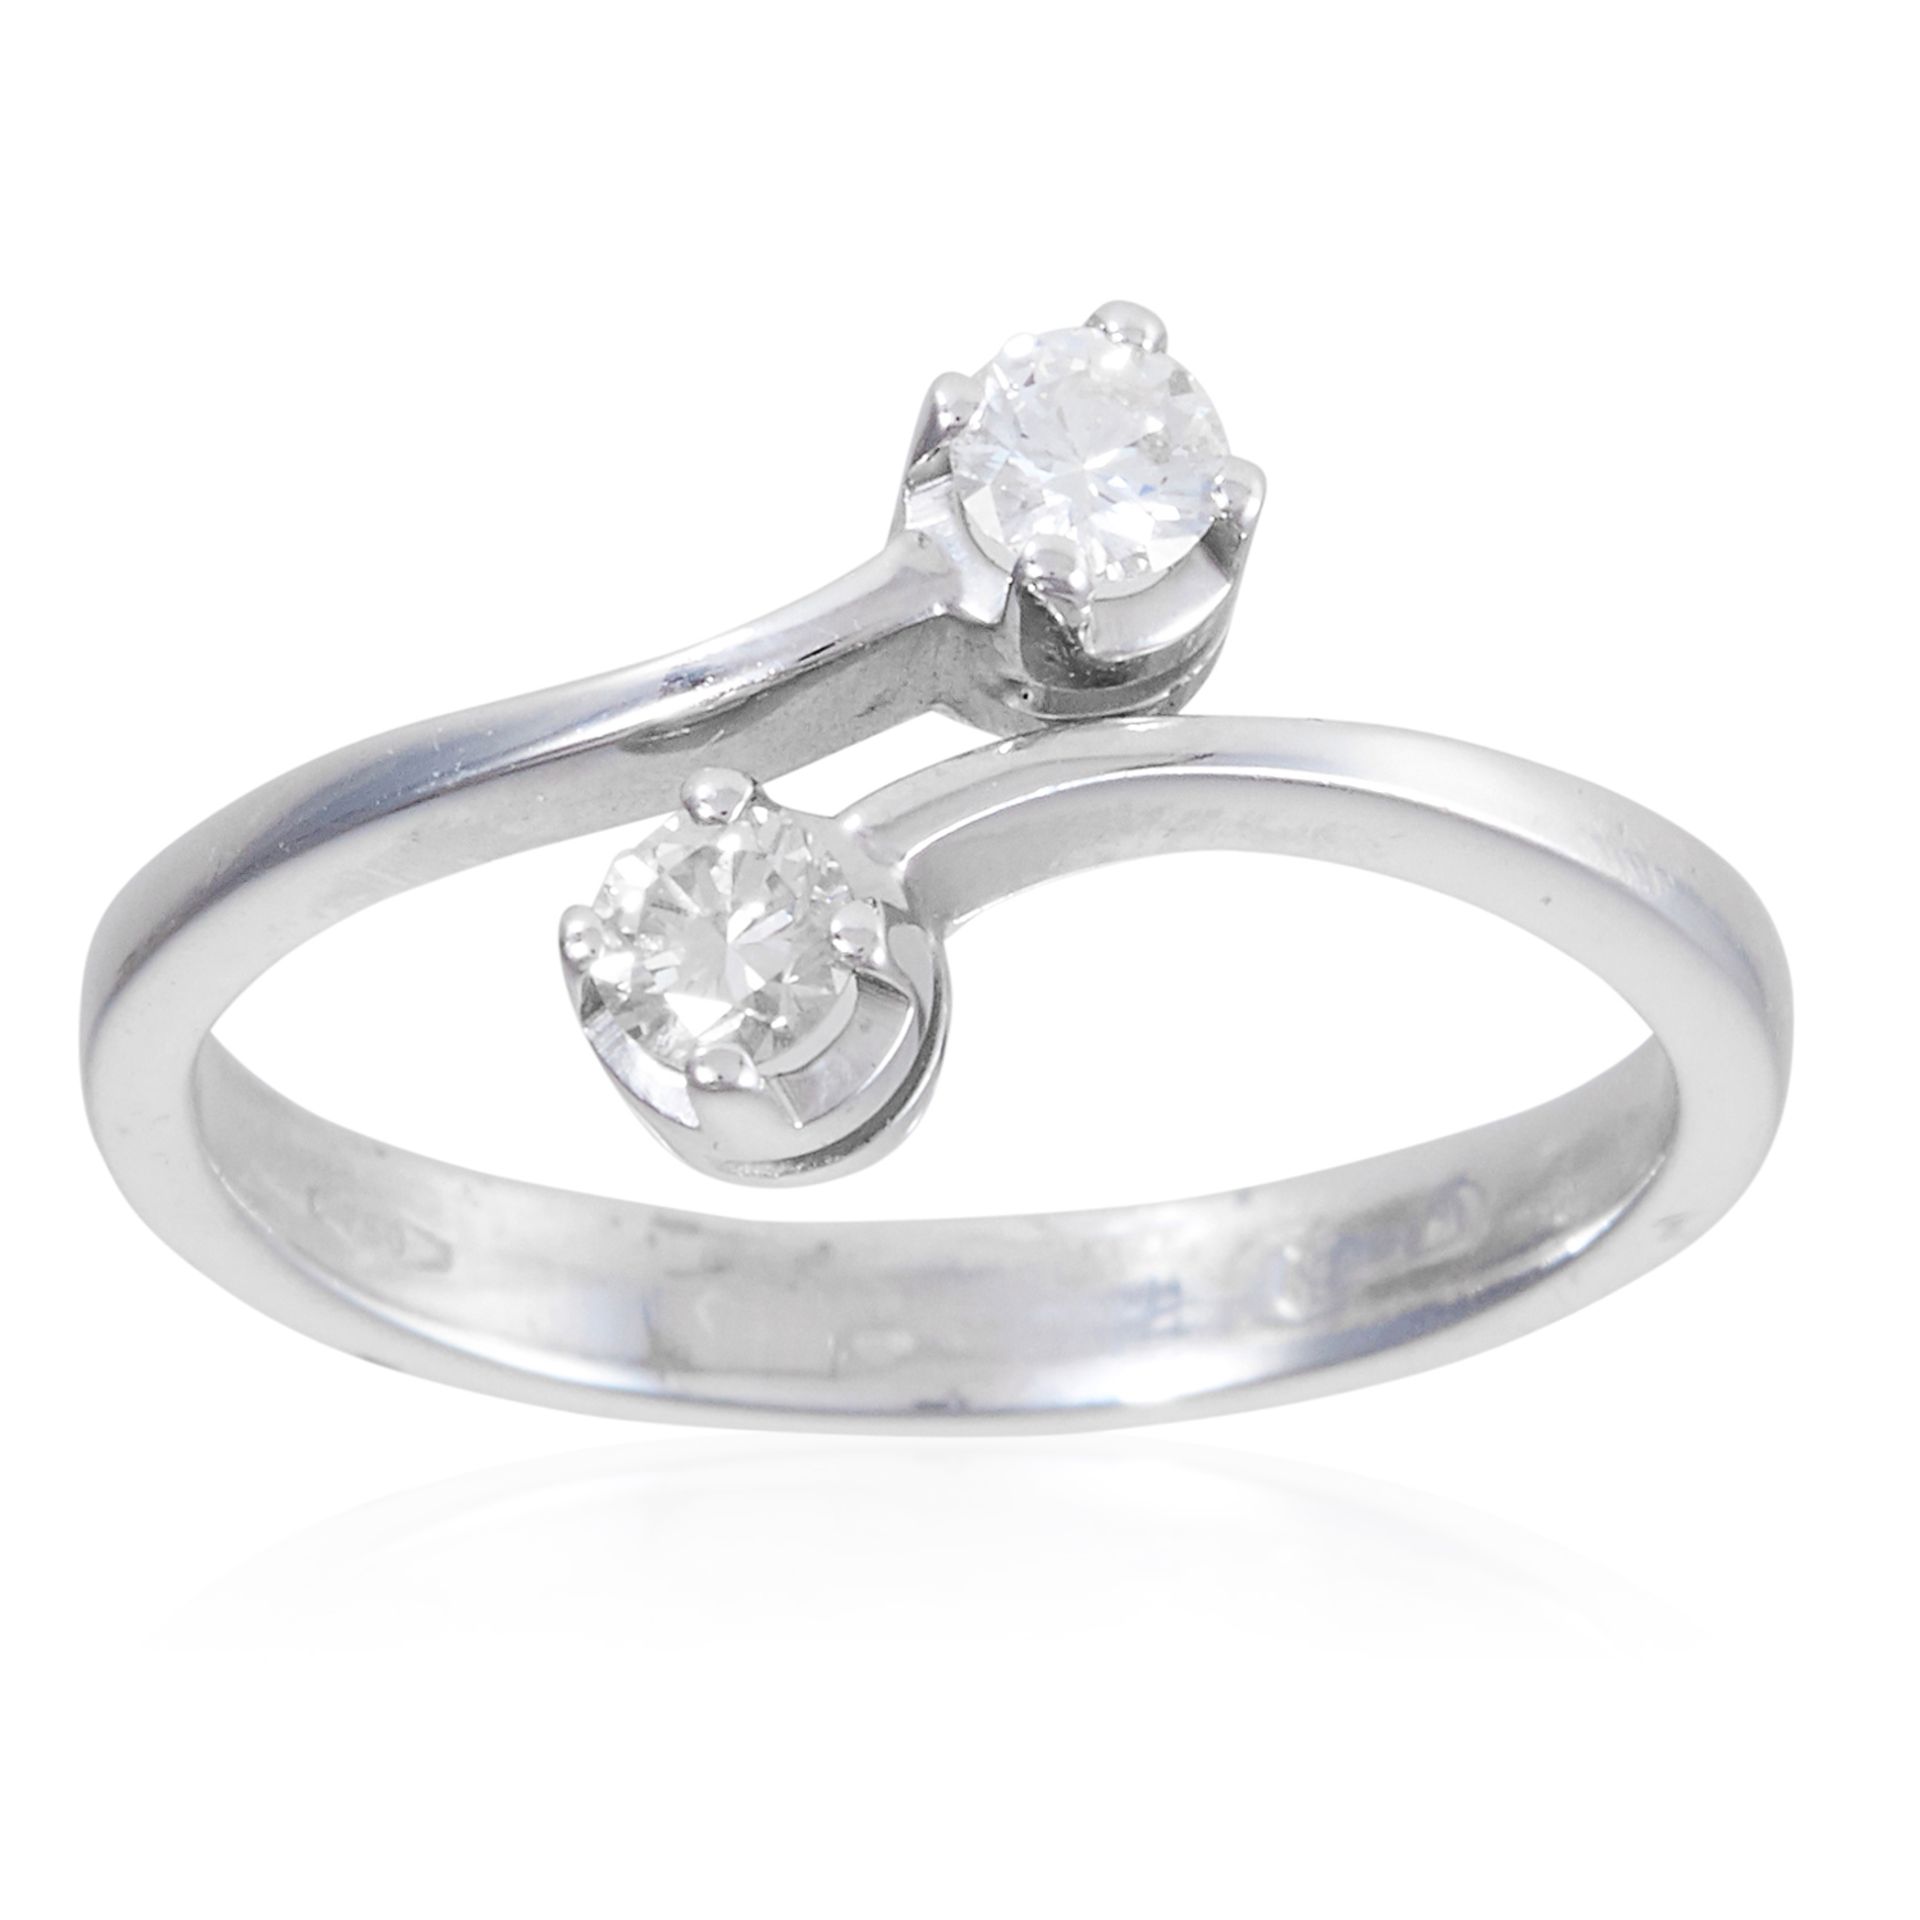 A DIAMOND TOI ET MOI RING, in 18ct white gold, designed as a crossover with 0.2ct of round cut